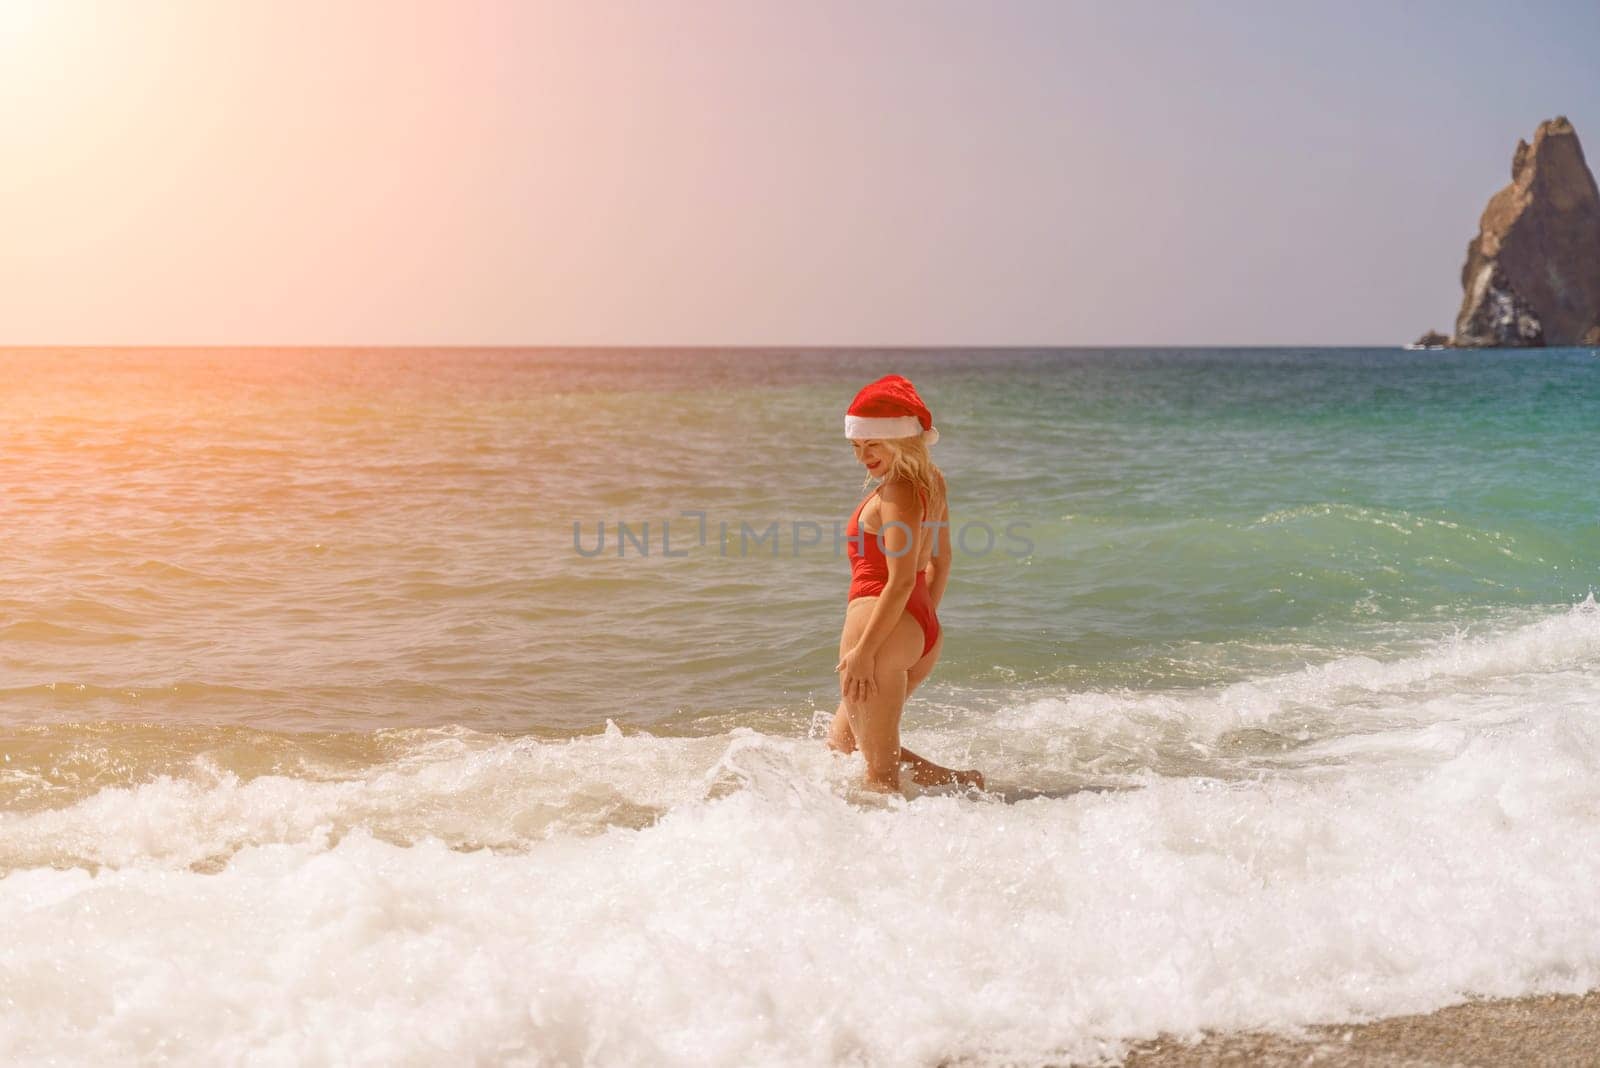 A woman in Santa hat on the seashore, dressed in a red swimsuit. New Year's celebration in a hot country by Matiunina